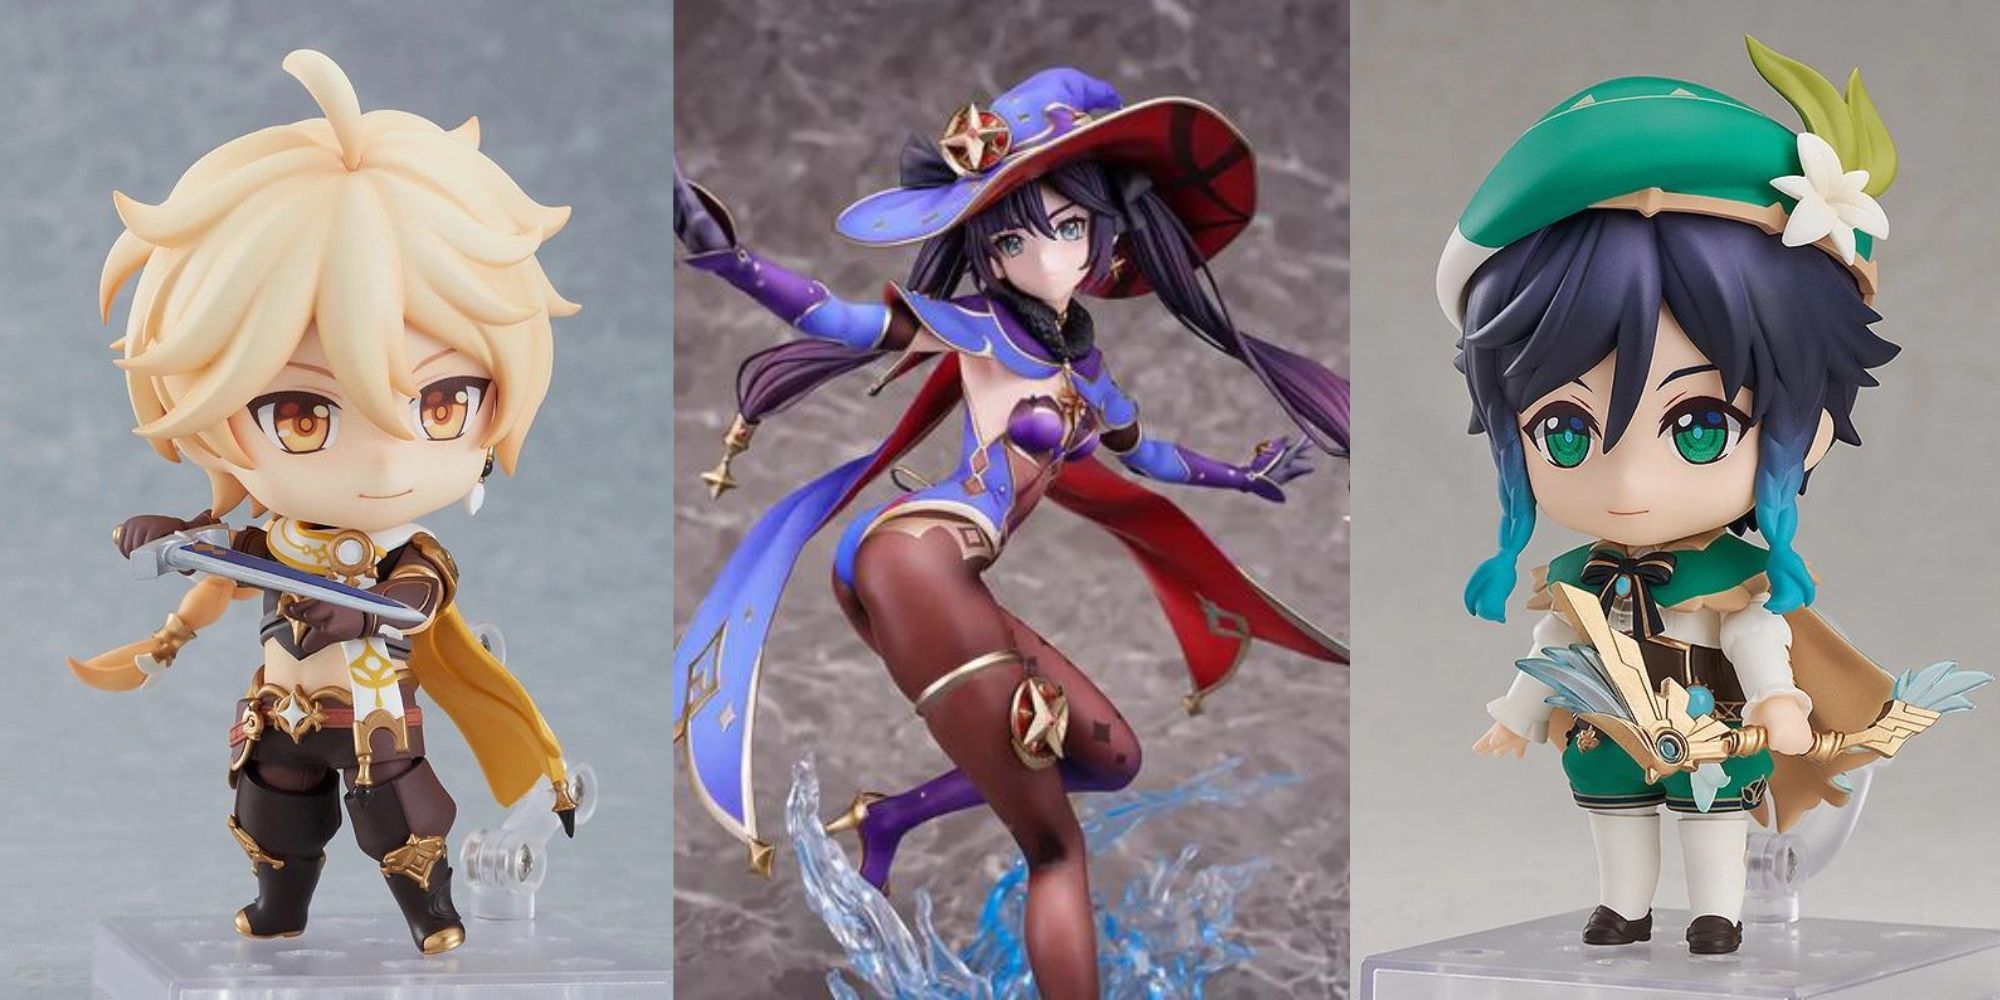 Genshin Impact: Best Collectable Figures featuring Nendoroid Aether, Figma Mona, and Nendoroid Venti